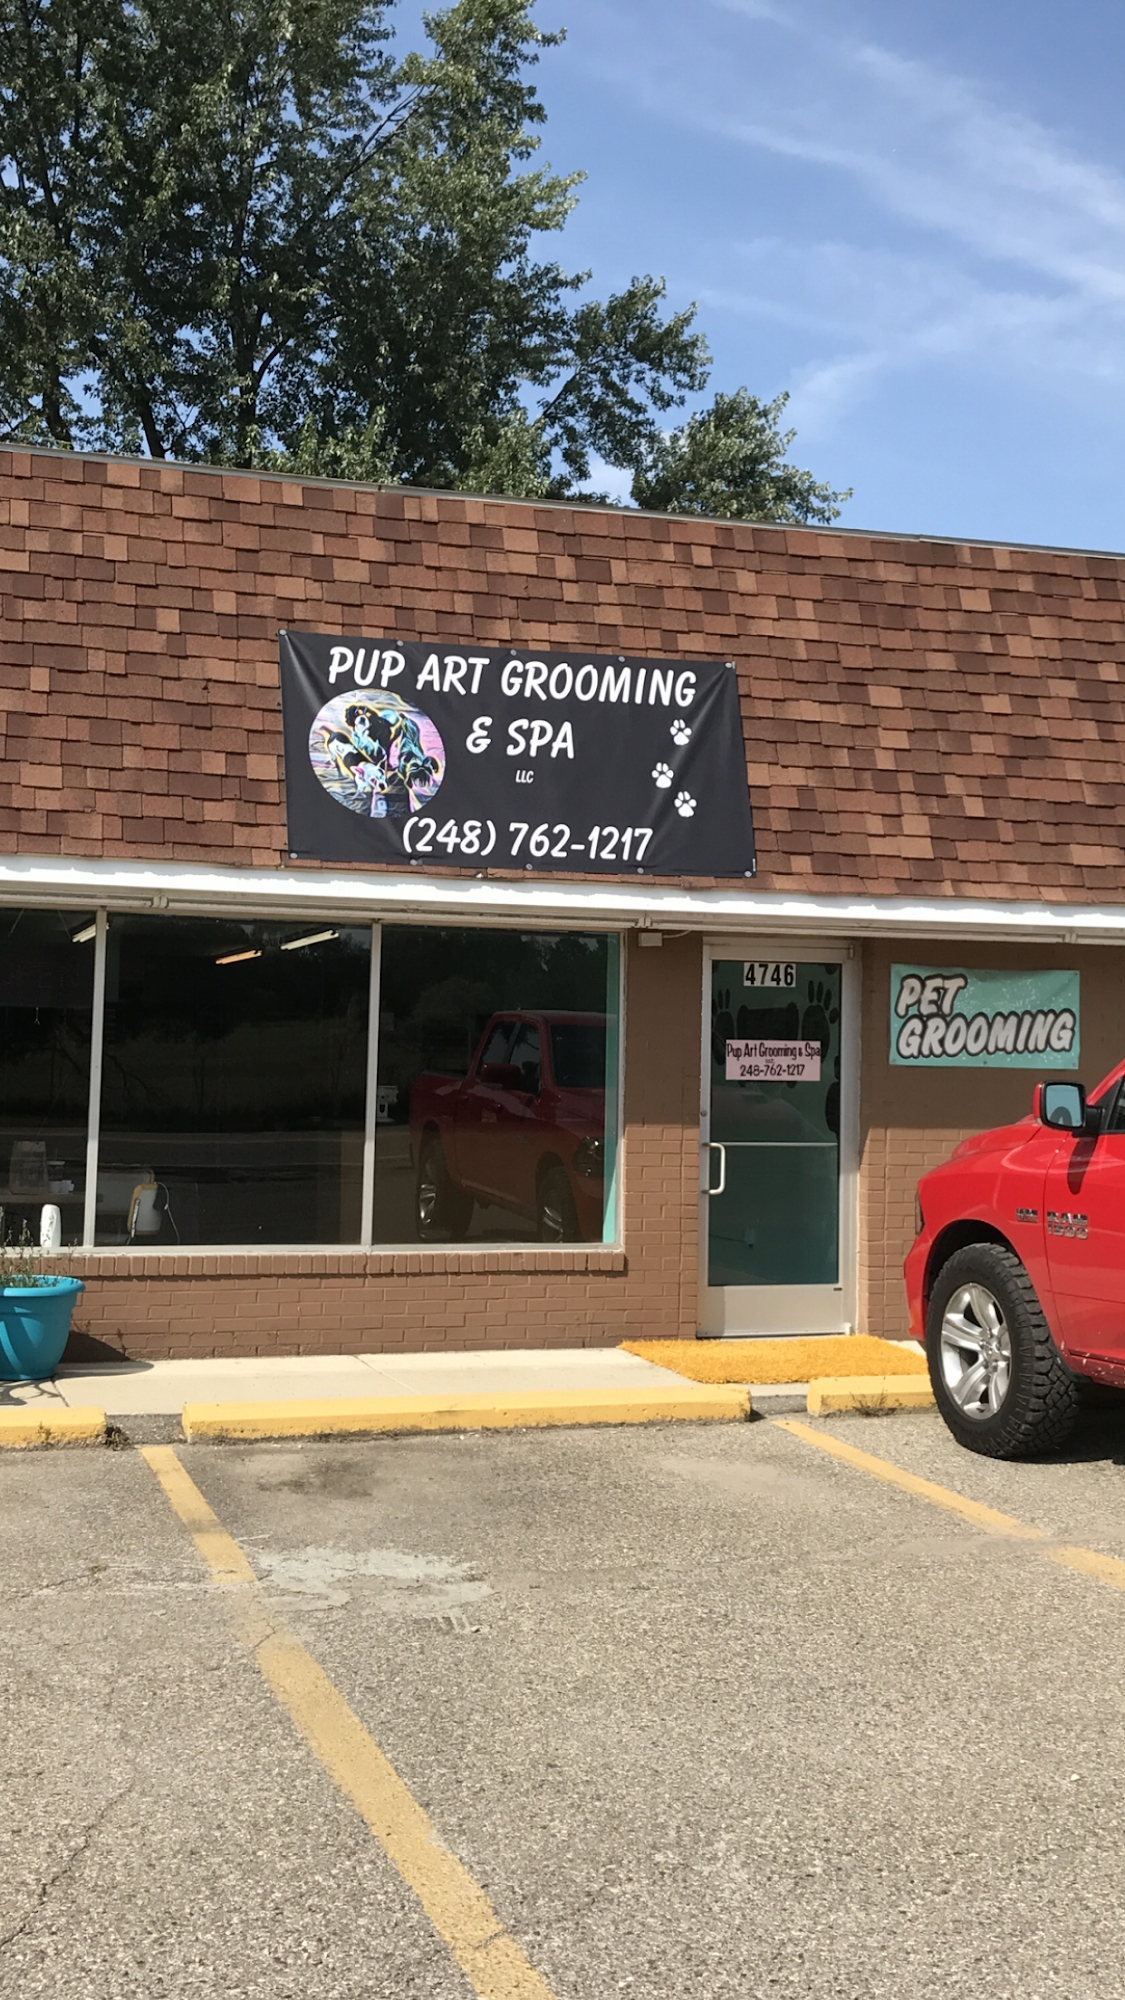 Pup Art Grooming & Spa 4746 Clarkston Rd, Independence Michigan 48348